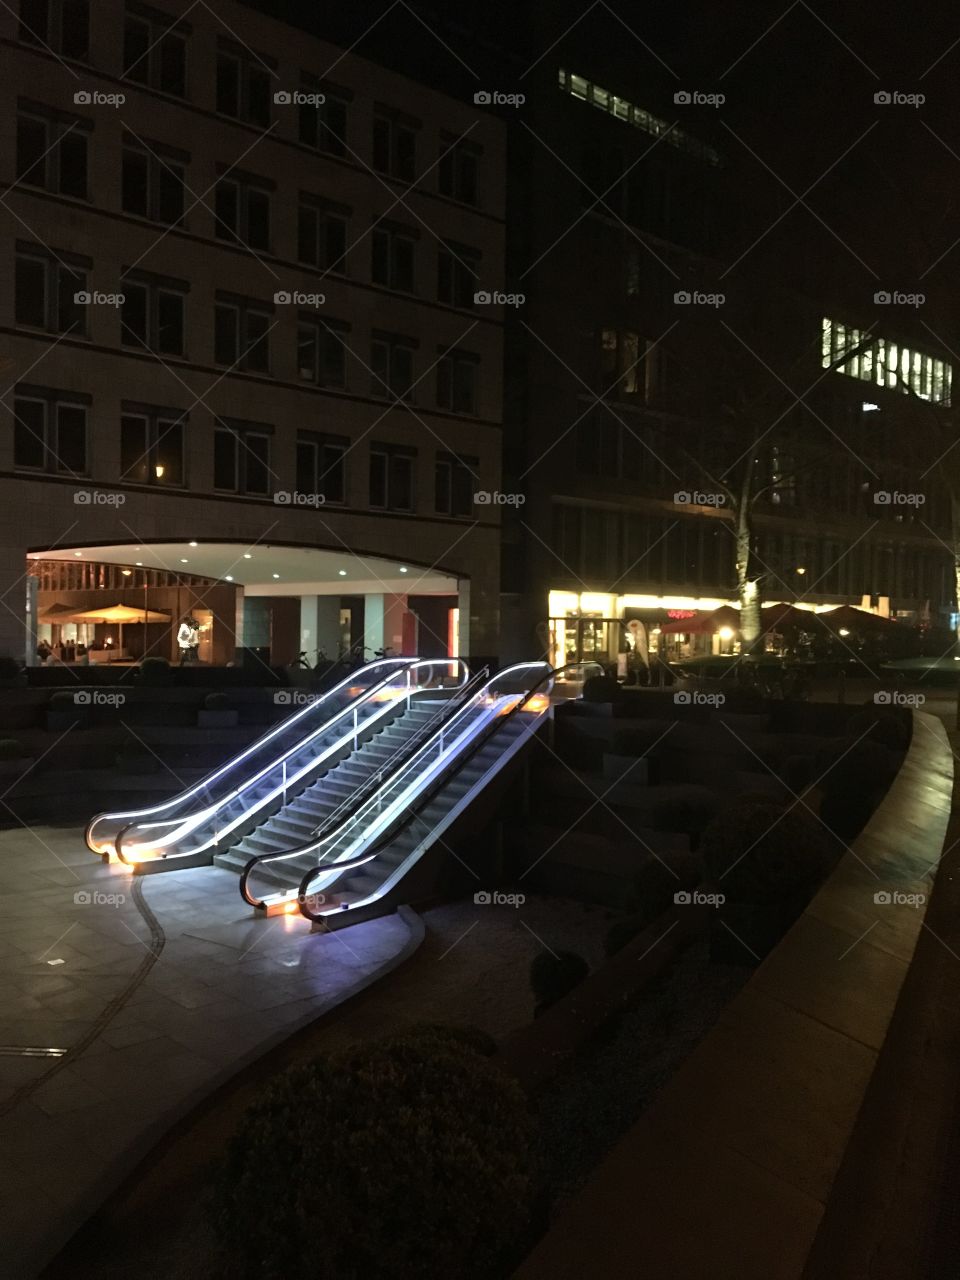 A lit Staircase in the city